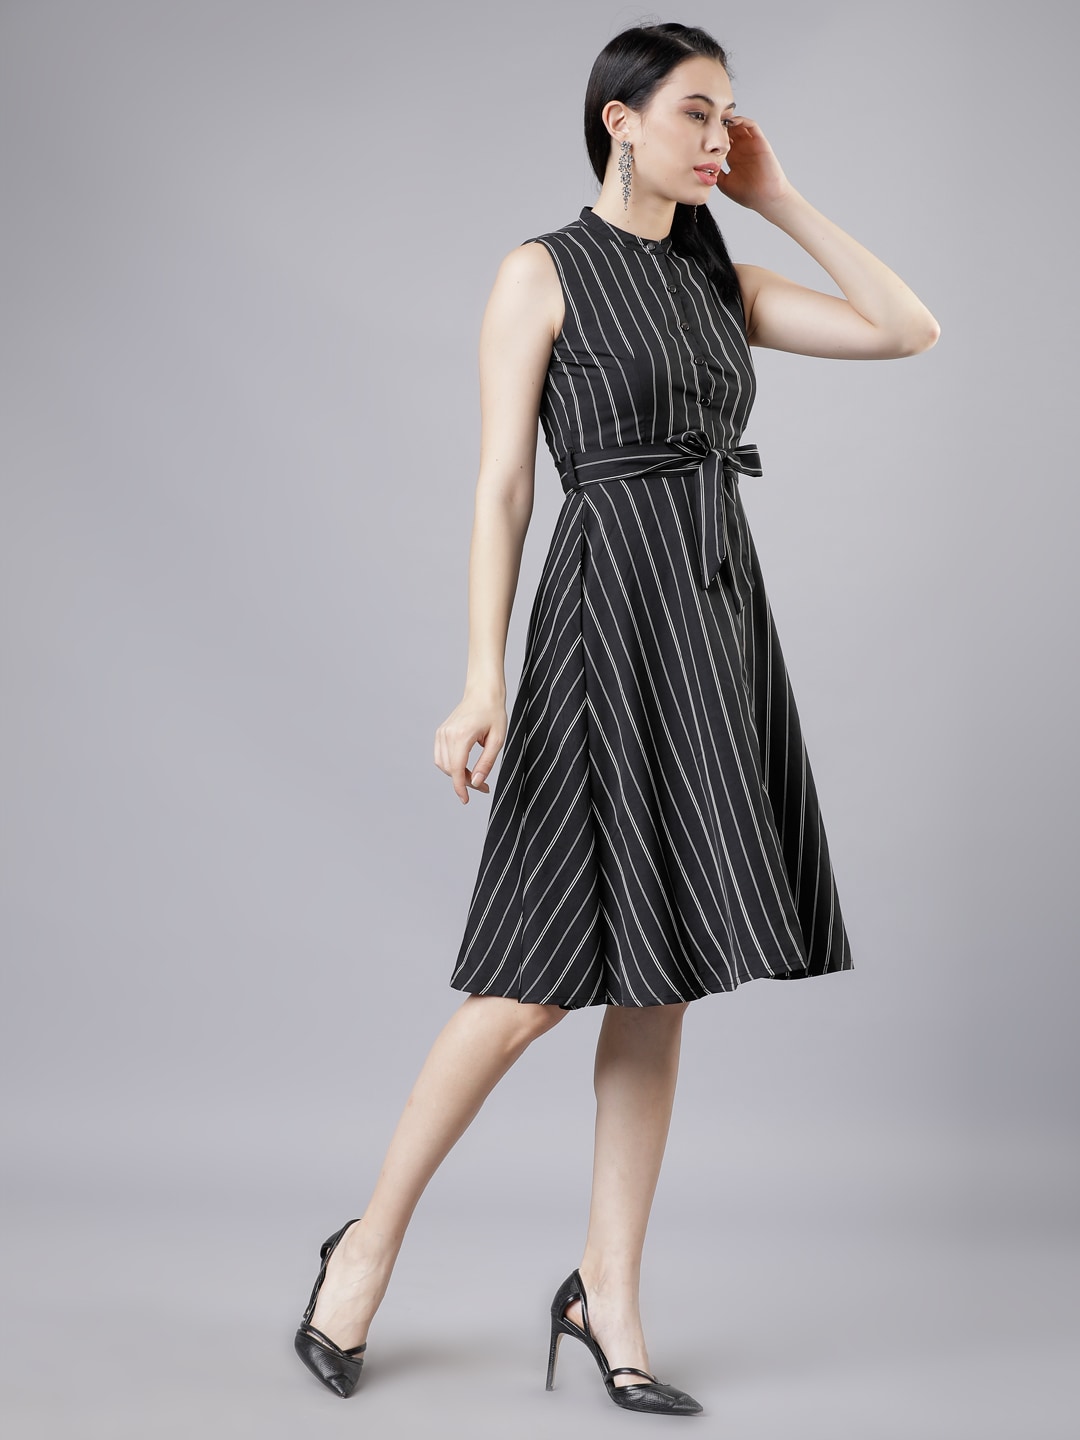 Tokyo Talkies Women Black & White Fit and Flare Dress Price in India